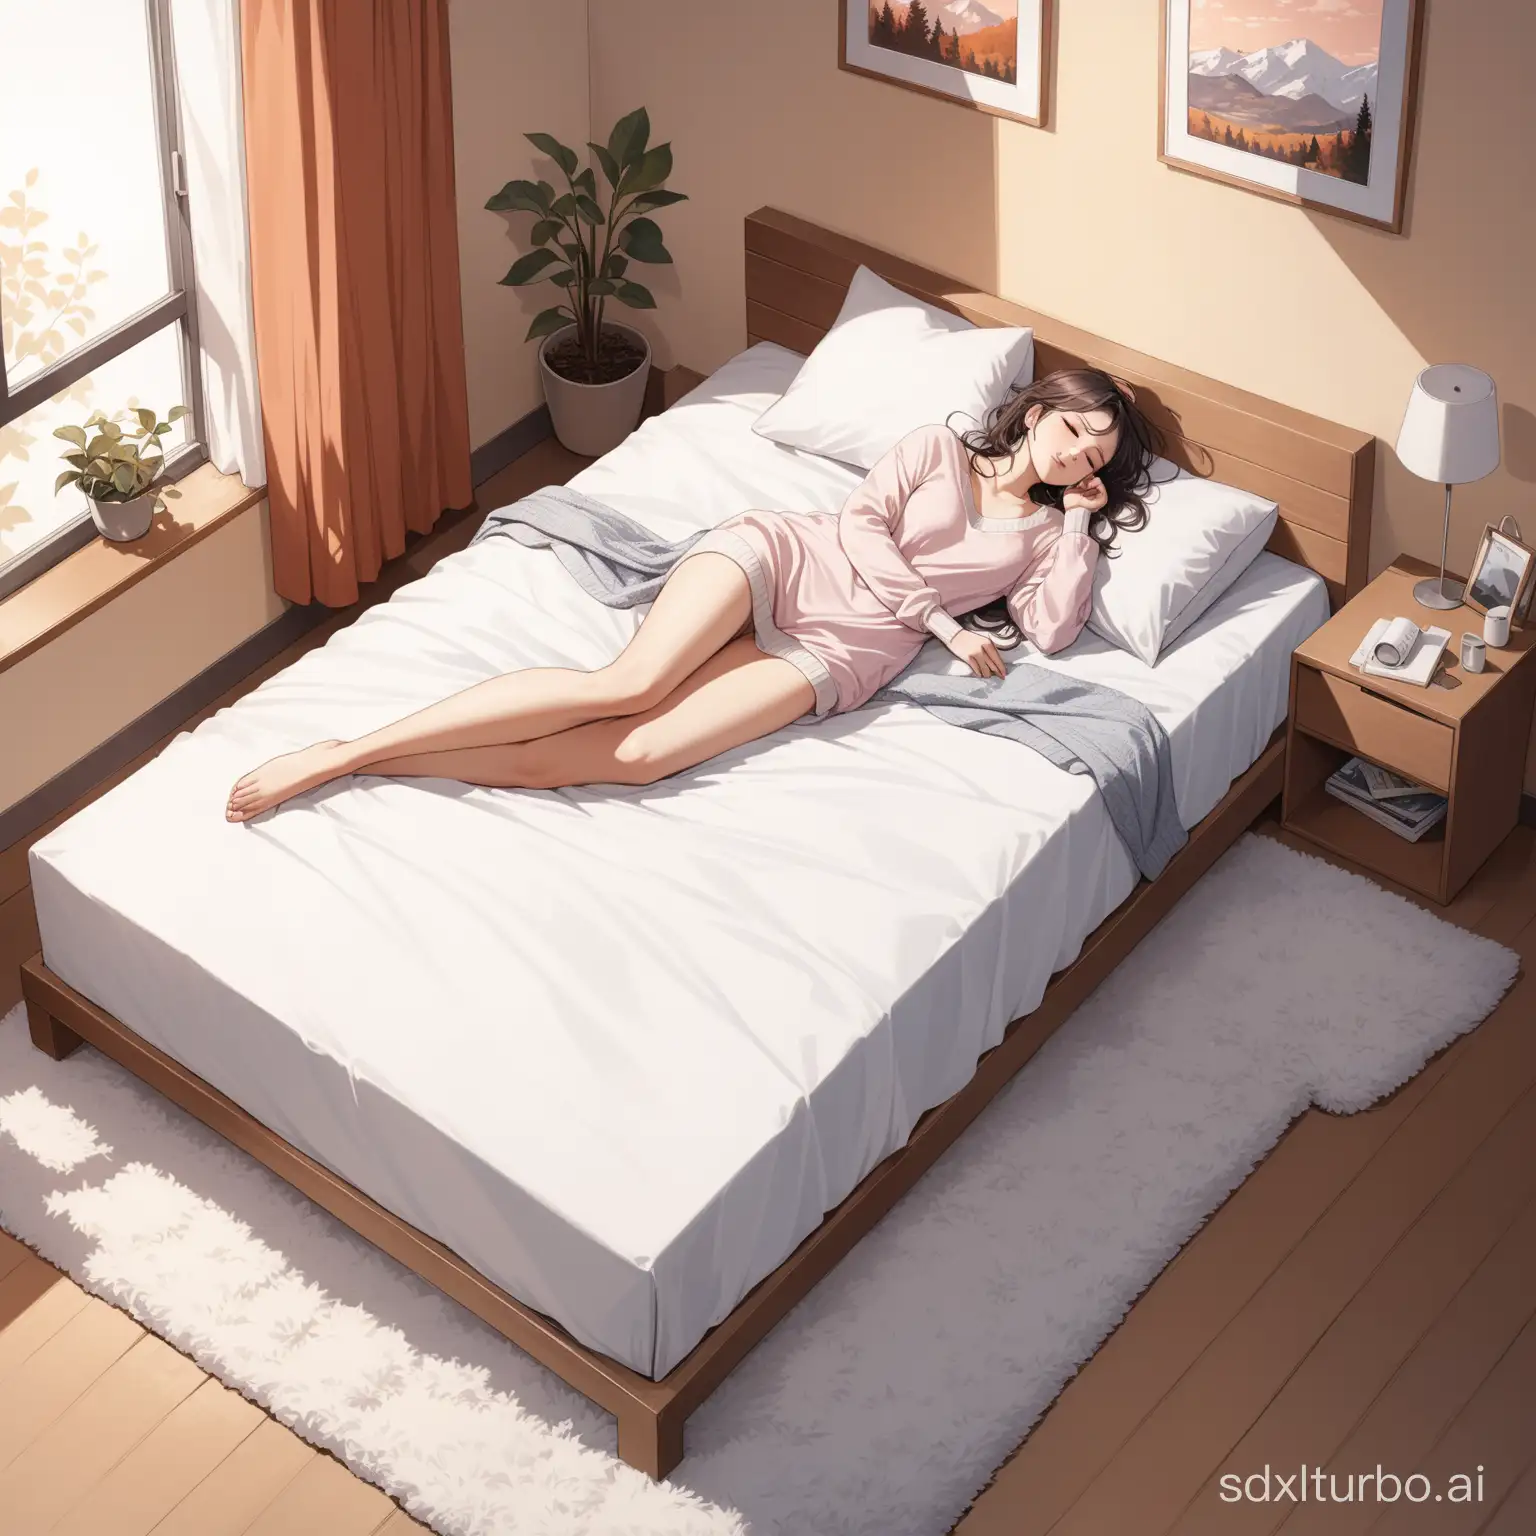 Cozy-Modern-Full-Body-Image-of-a-Person-Laying-in-Bed-with-Warm-Bedding